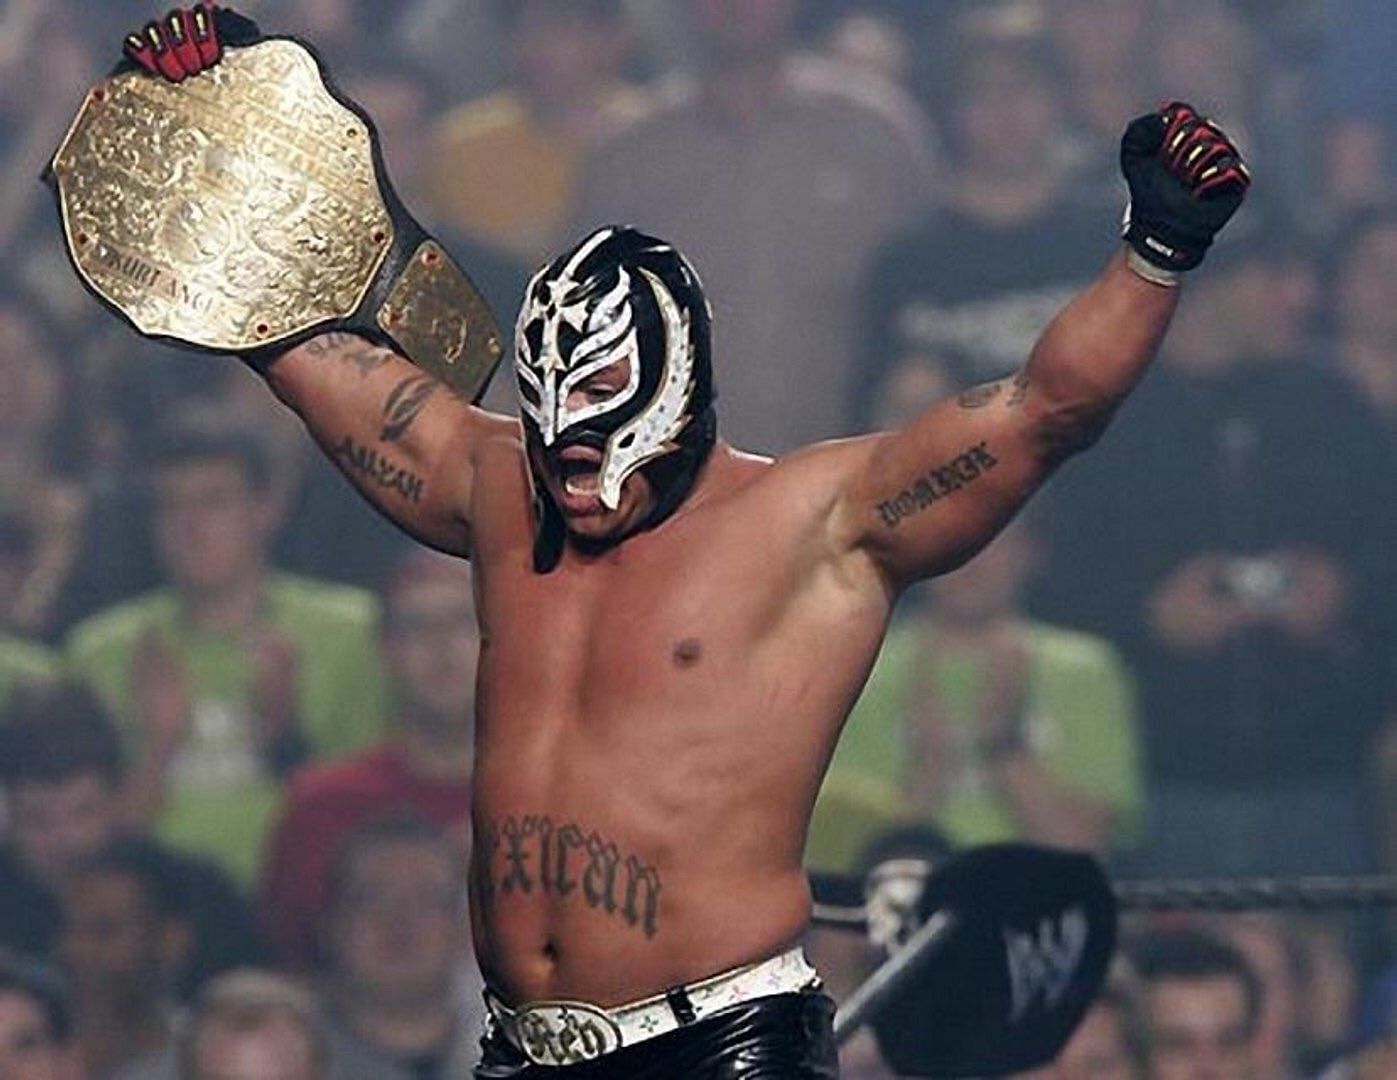 Rey Mysterio is a three-time world champion in WWE